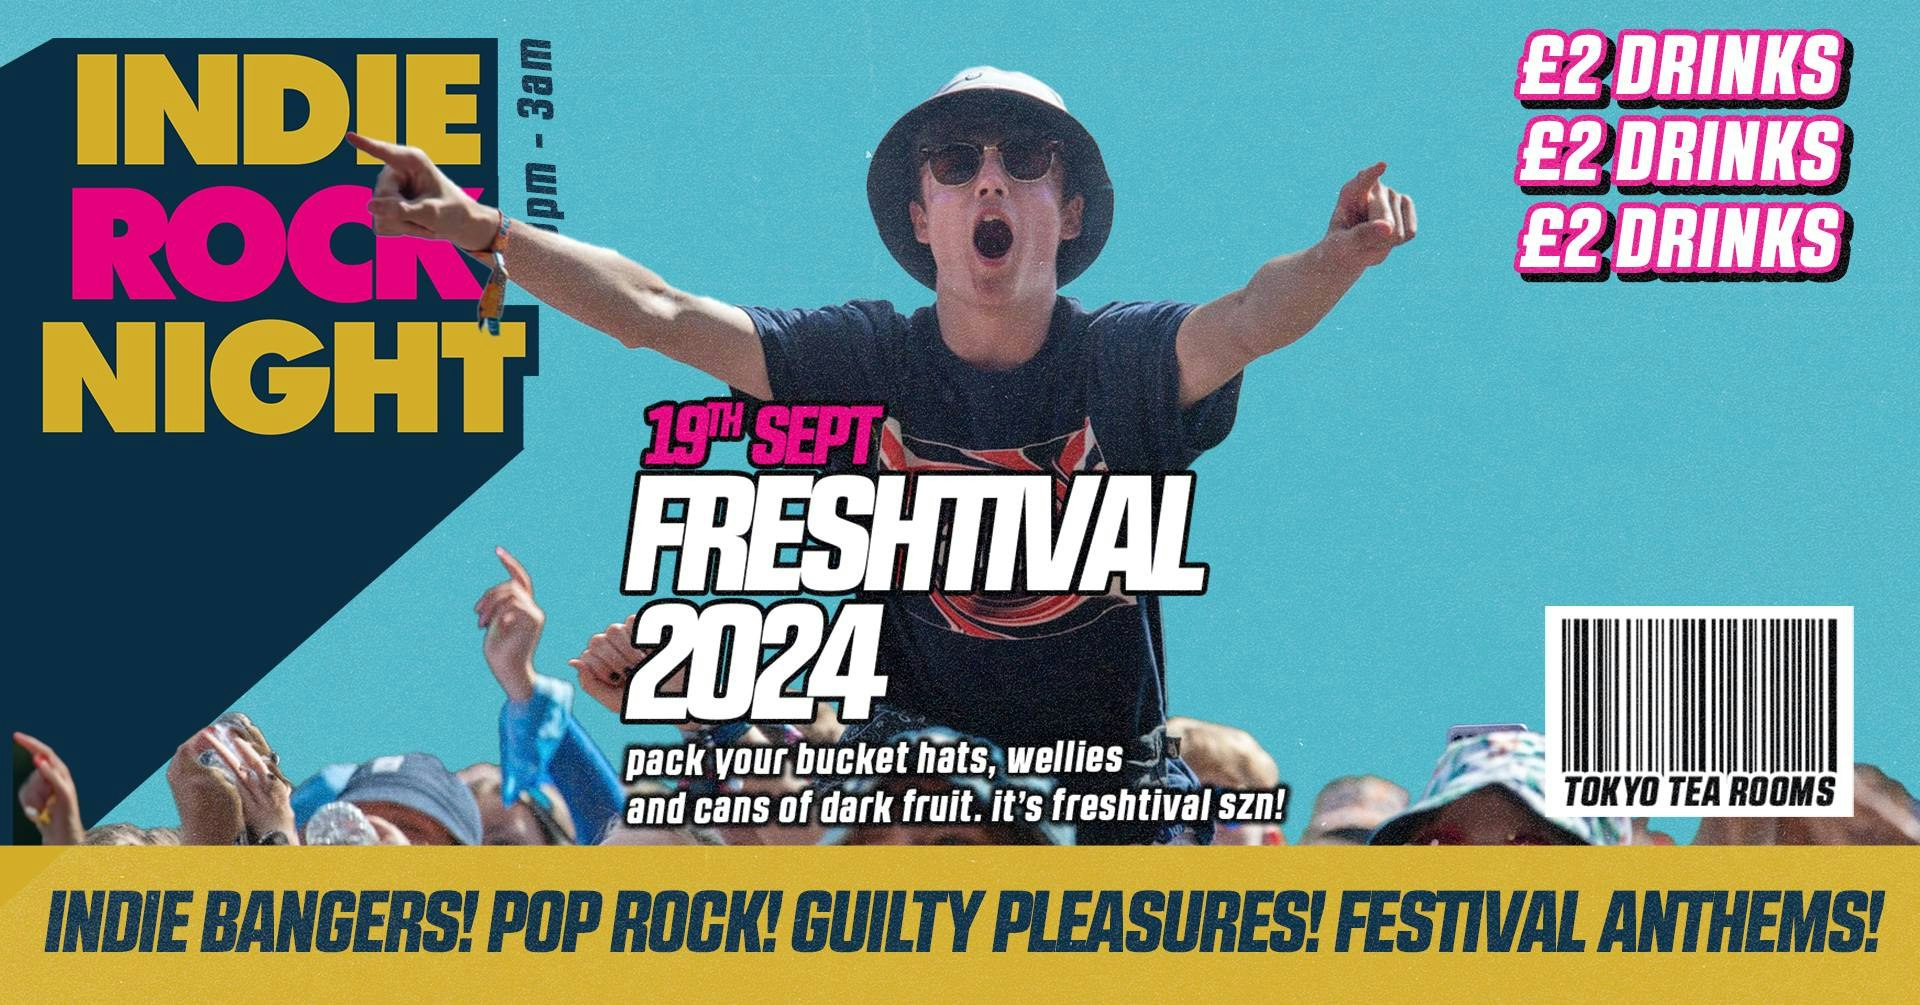 Indie Rock Night ∙ FRESHTIVAL 2024 *ONLY 10 £2 TICKETS LEFT*